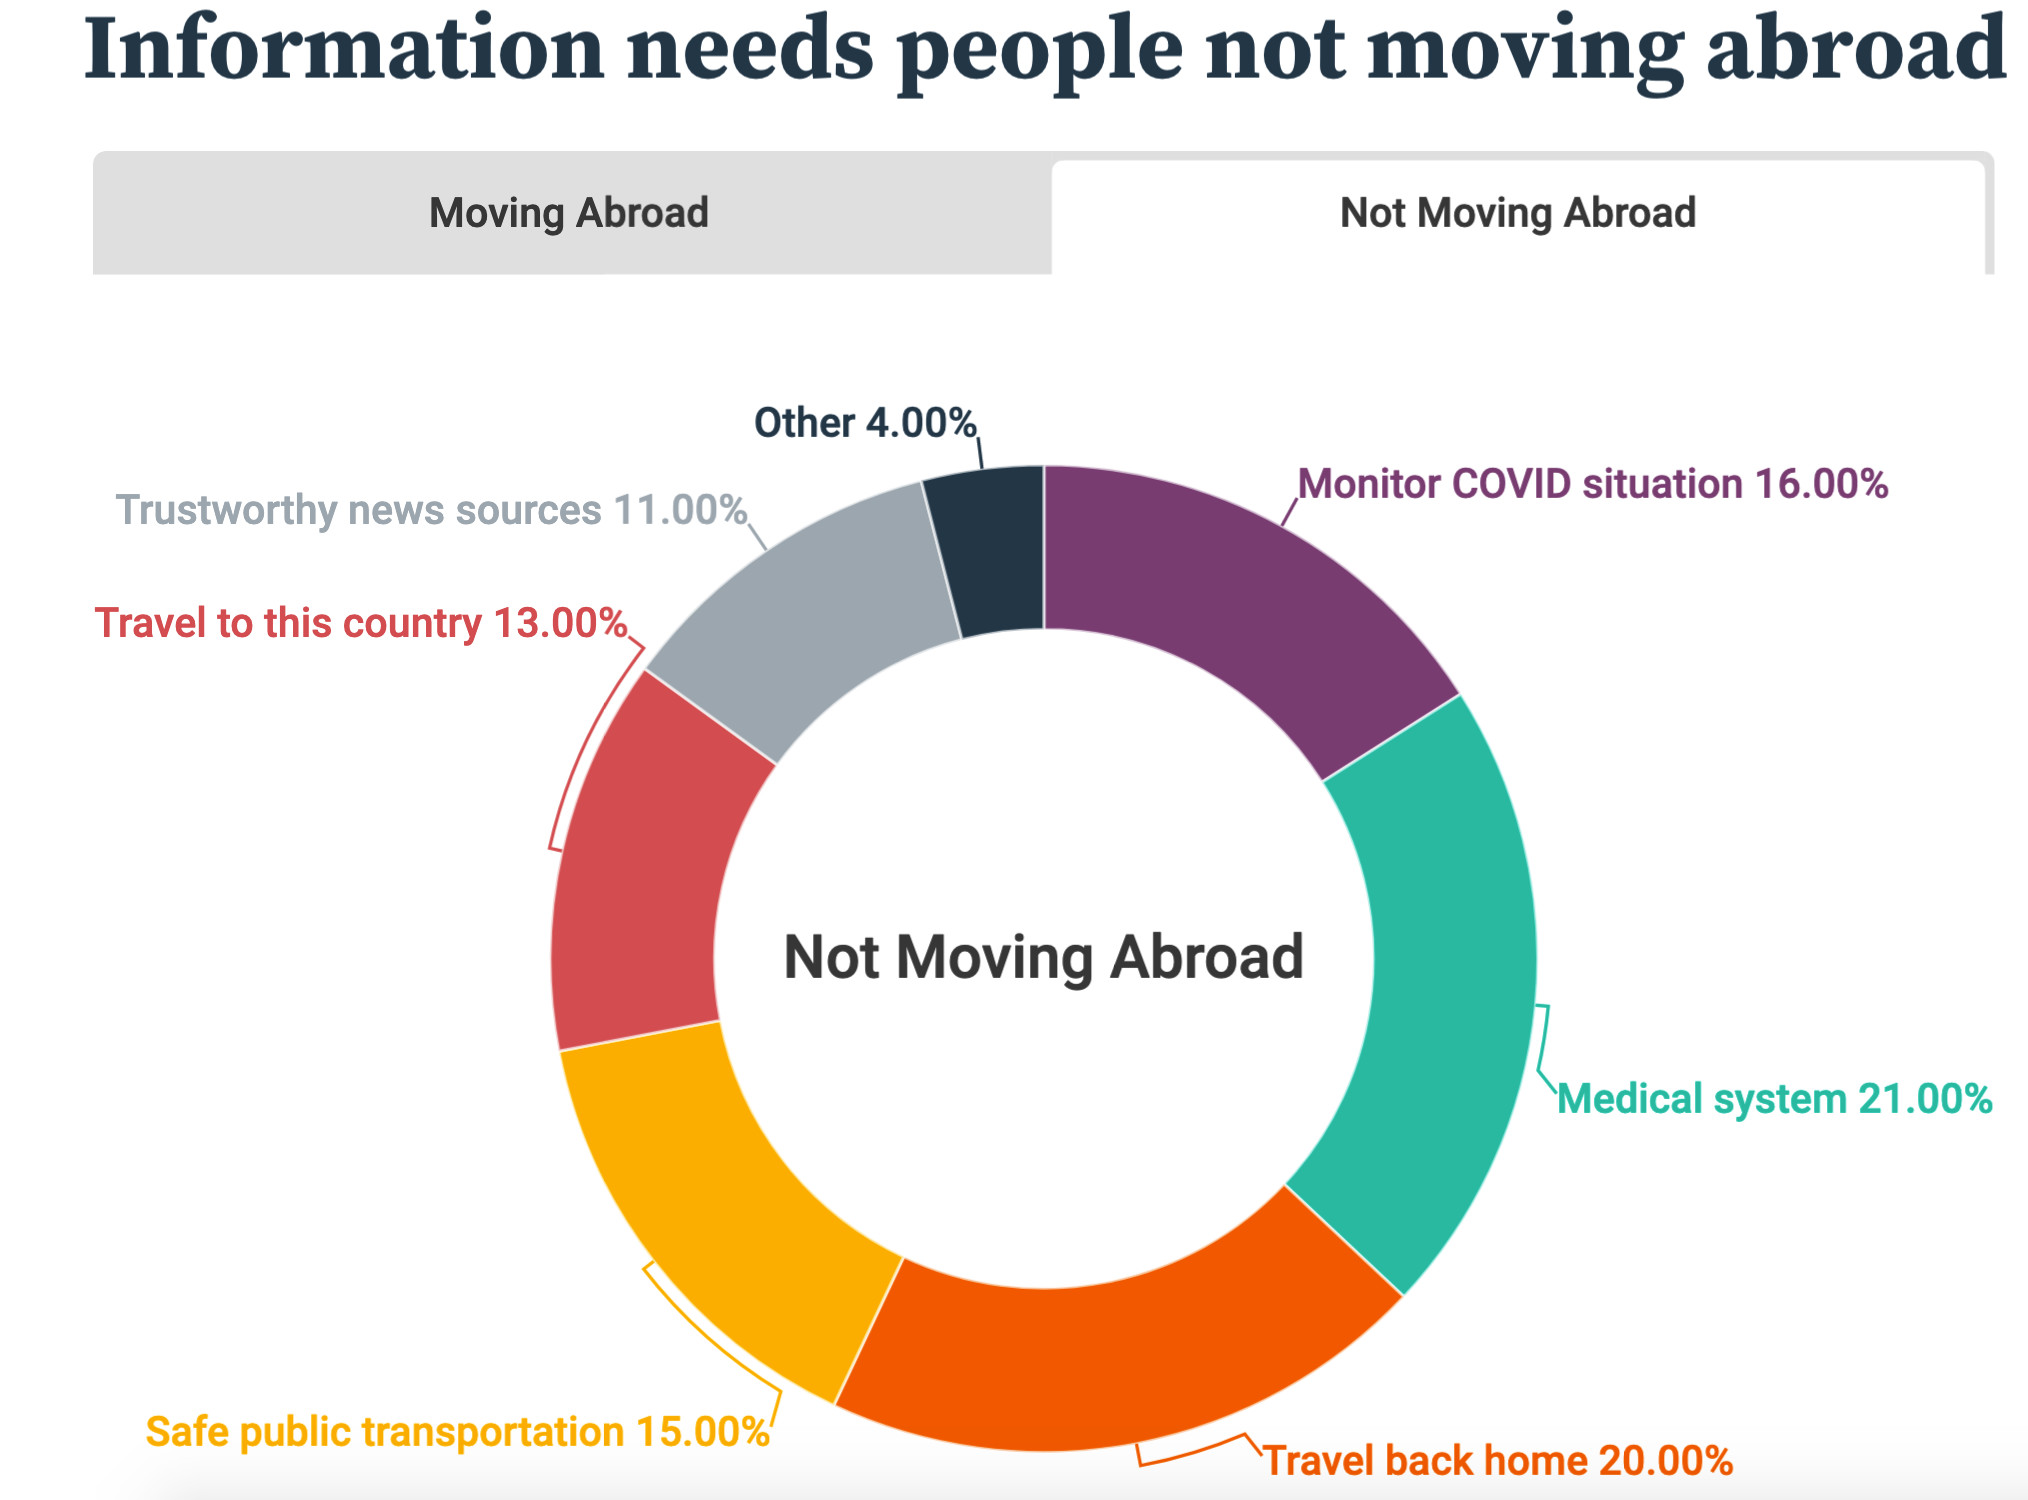 HousingAnywhere Information Need People Not Moving Abroad Survey September 2020